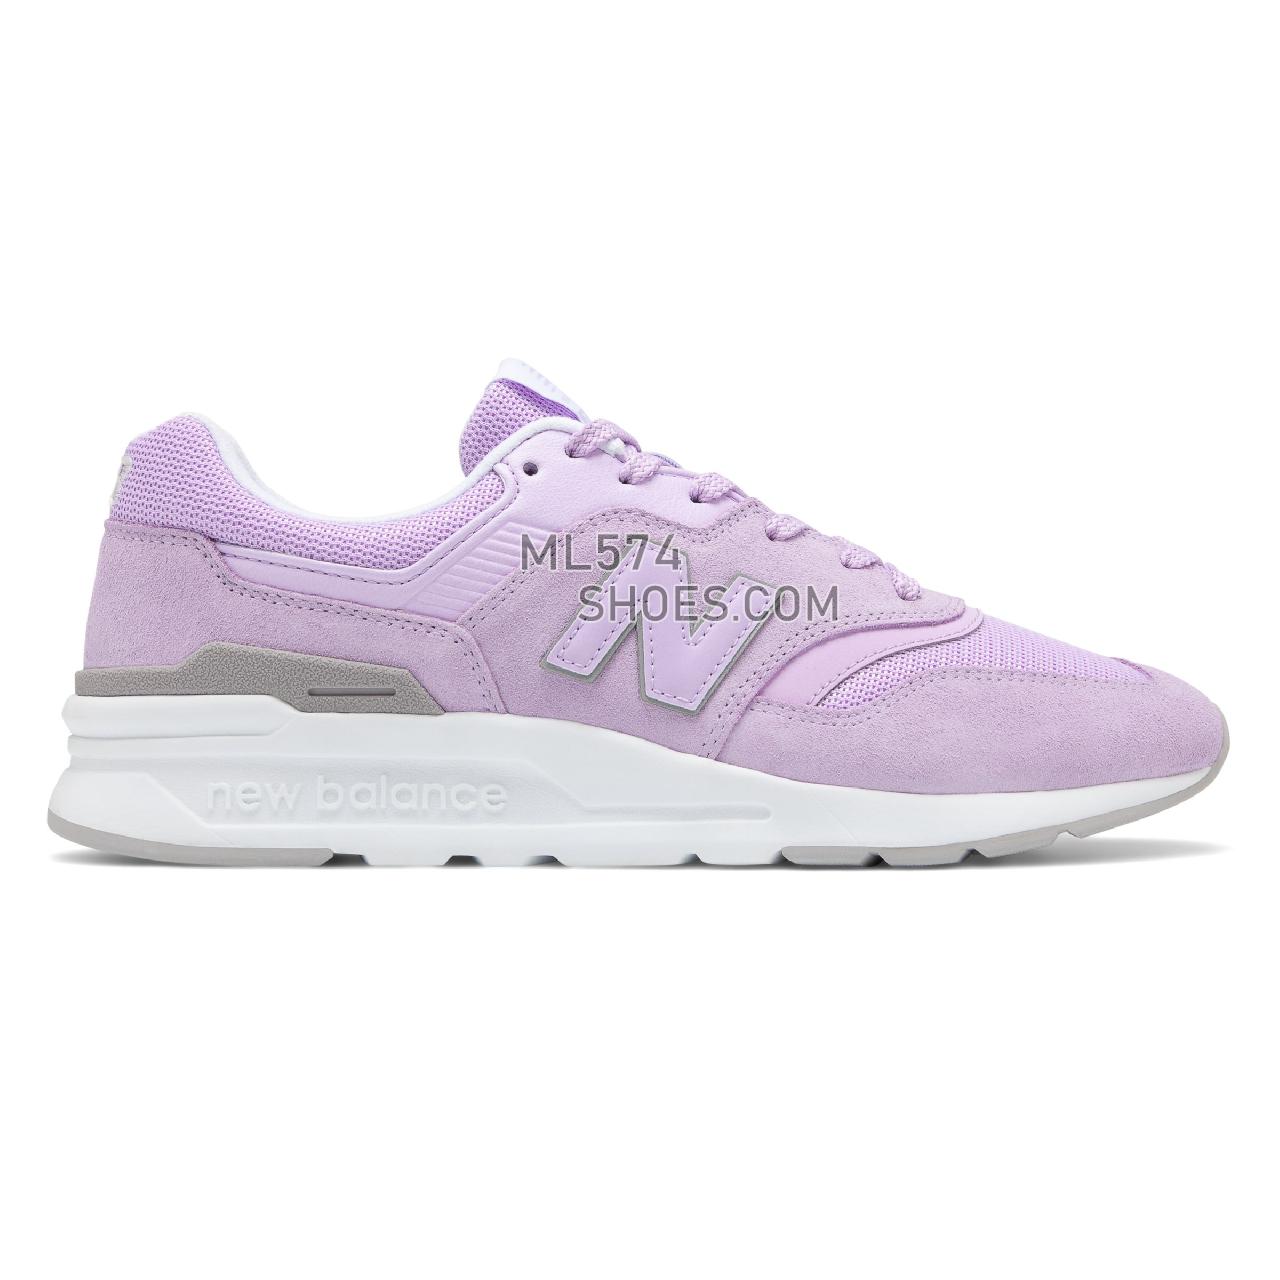 New Balance 997H - Men's Classic Sneakers - Violet Glo with Light Cyclone - CM997HMB